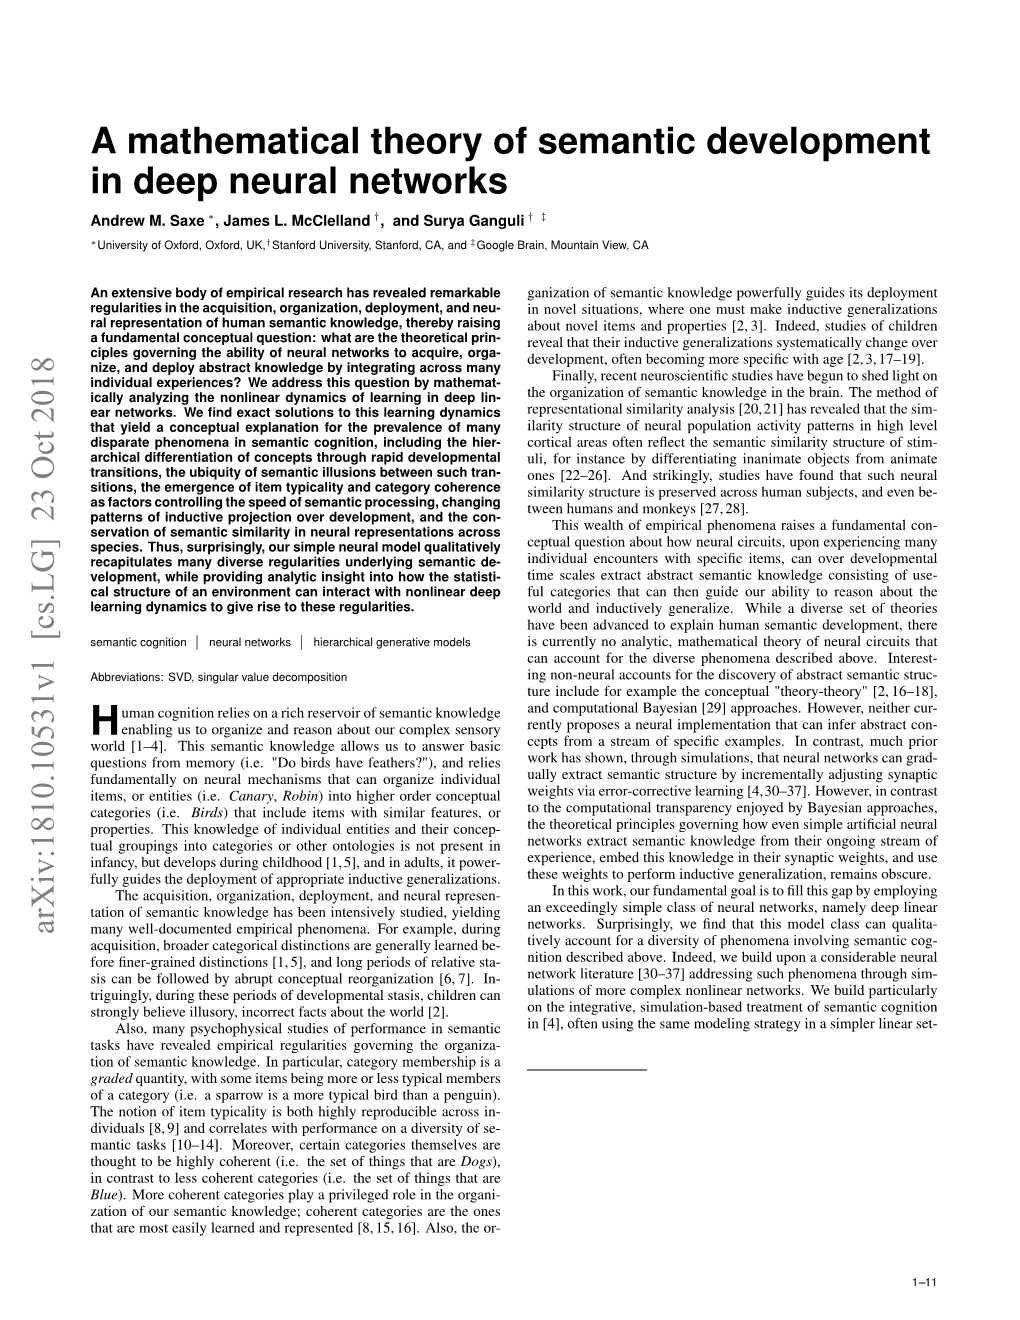 A Mathematical Theory of Semantic Development in Deep Neural Networks